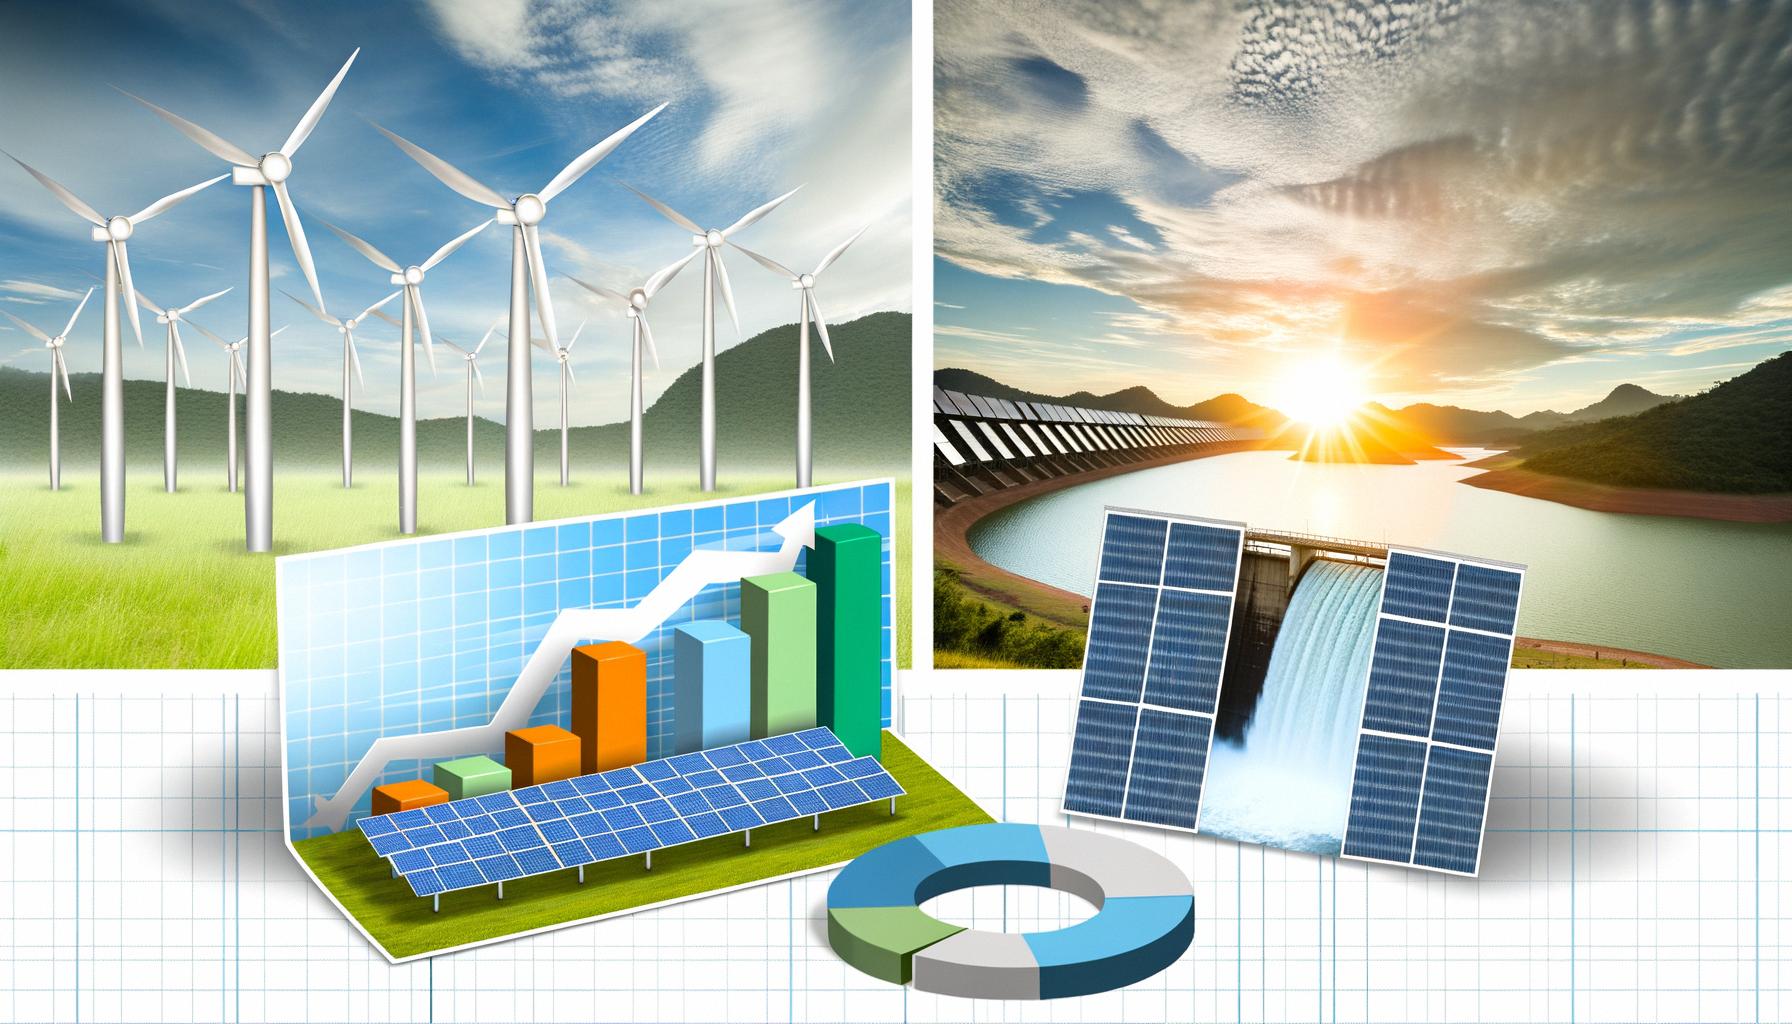 Renewable energy is crucial globally, driven by technological, geopolitical, and investment factors.